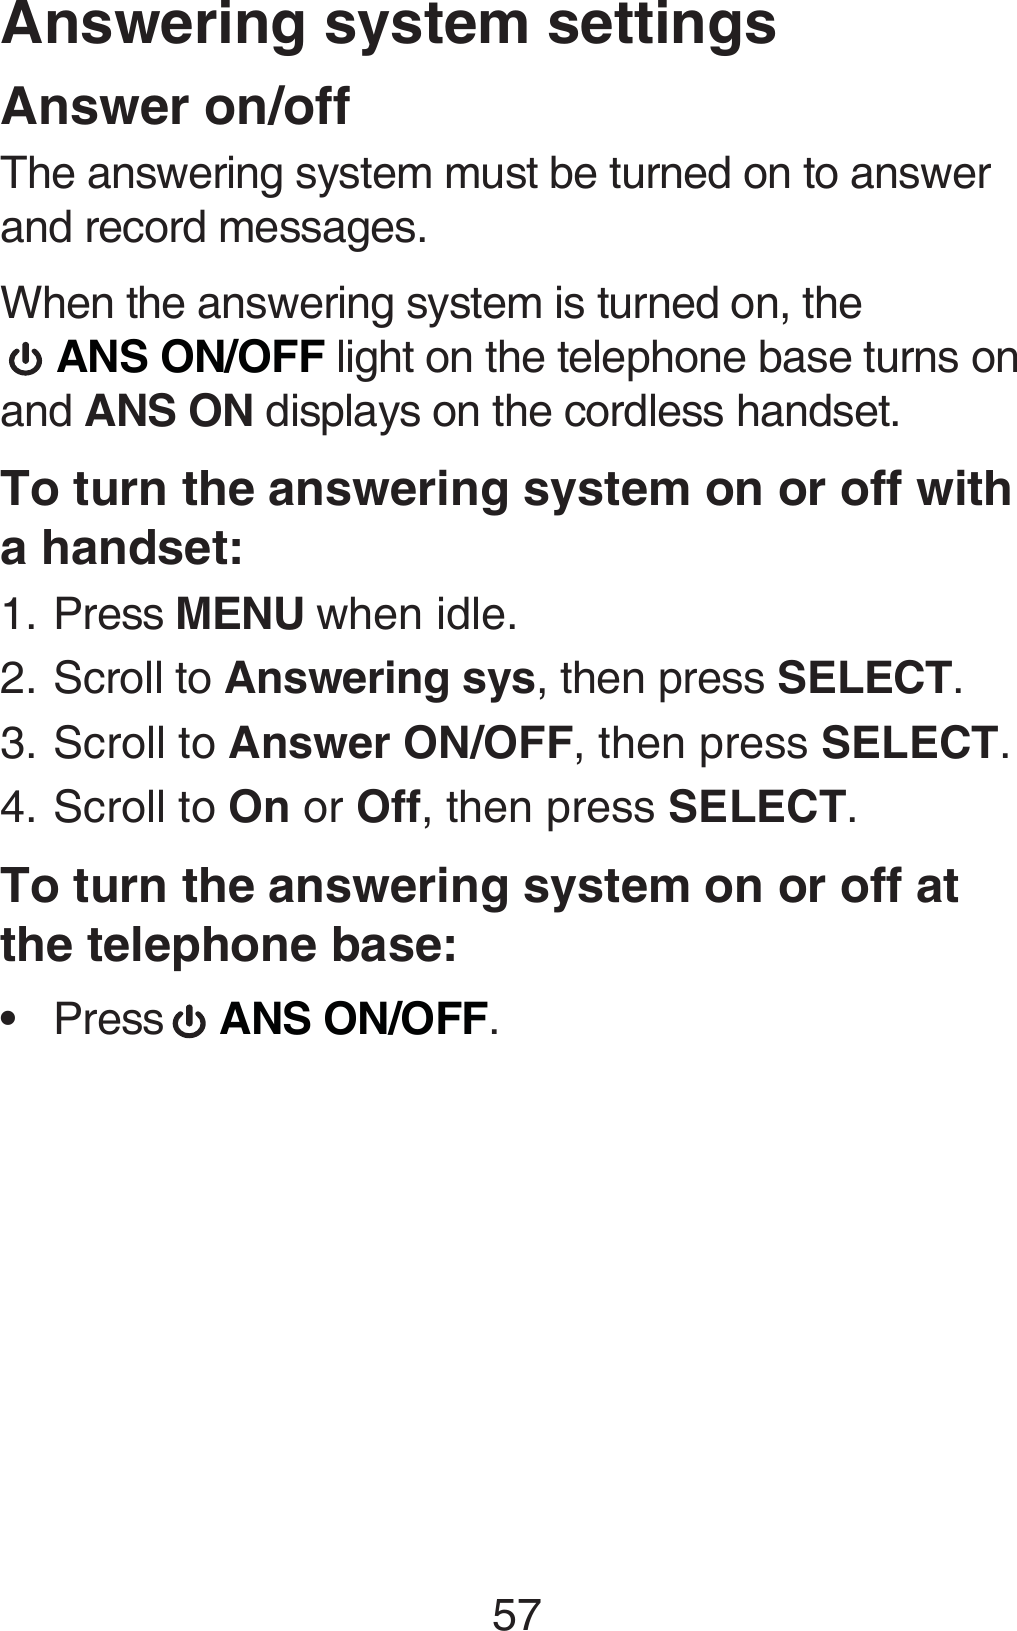 57Answering system settingsAnswer on/offThe answering system must be turned on to answer and record messages.When the answering system is turned on, the   ANS ON/OFF light on the telephone base turns on and ANS ON displays on the cordless handset.To turn the answering system on or off with a handset:Press MENU when idle.Scroll to Answering sys, then press SELECT.Scroll to Answer ON/OFF, then press SELECT.Scroll to On or Off, then press SELECT. To turn the answering system on or off at  the telephone base:Press   ANS ON/OFF.1.2.3.4.•